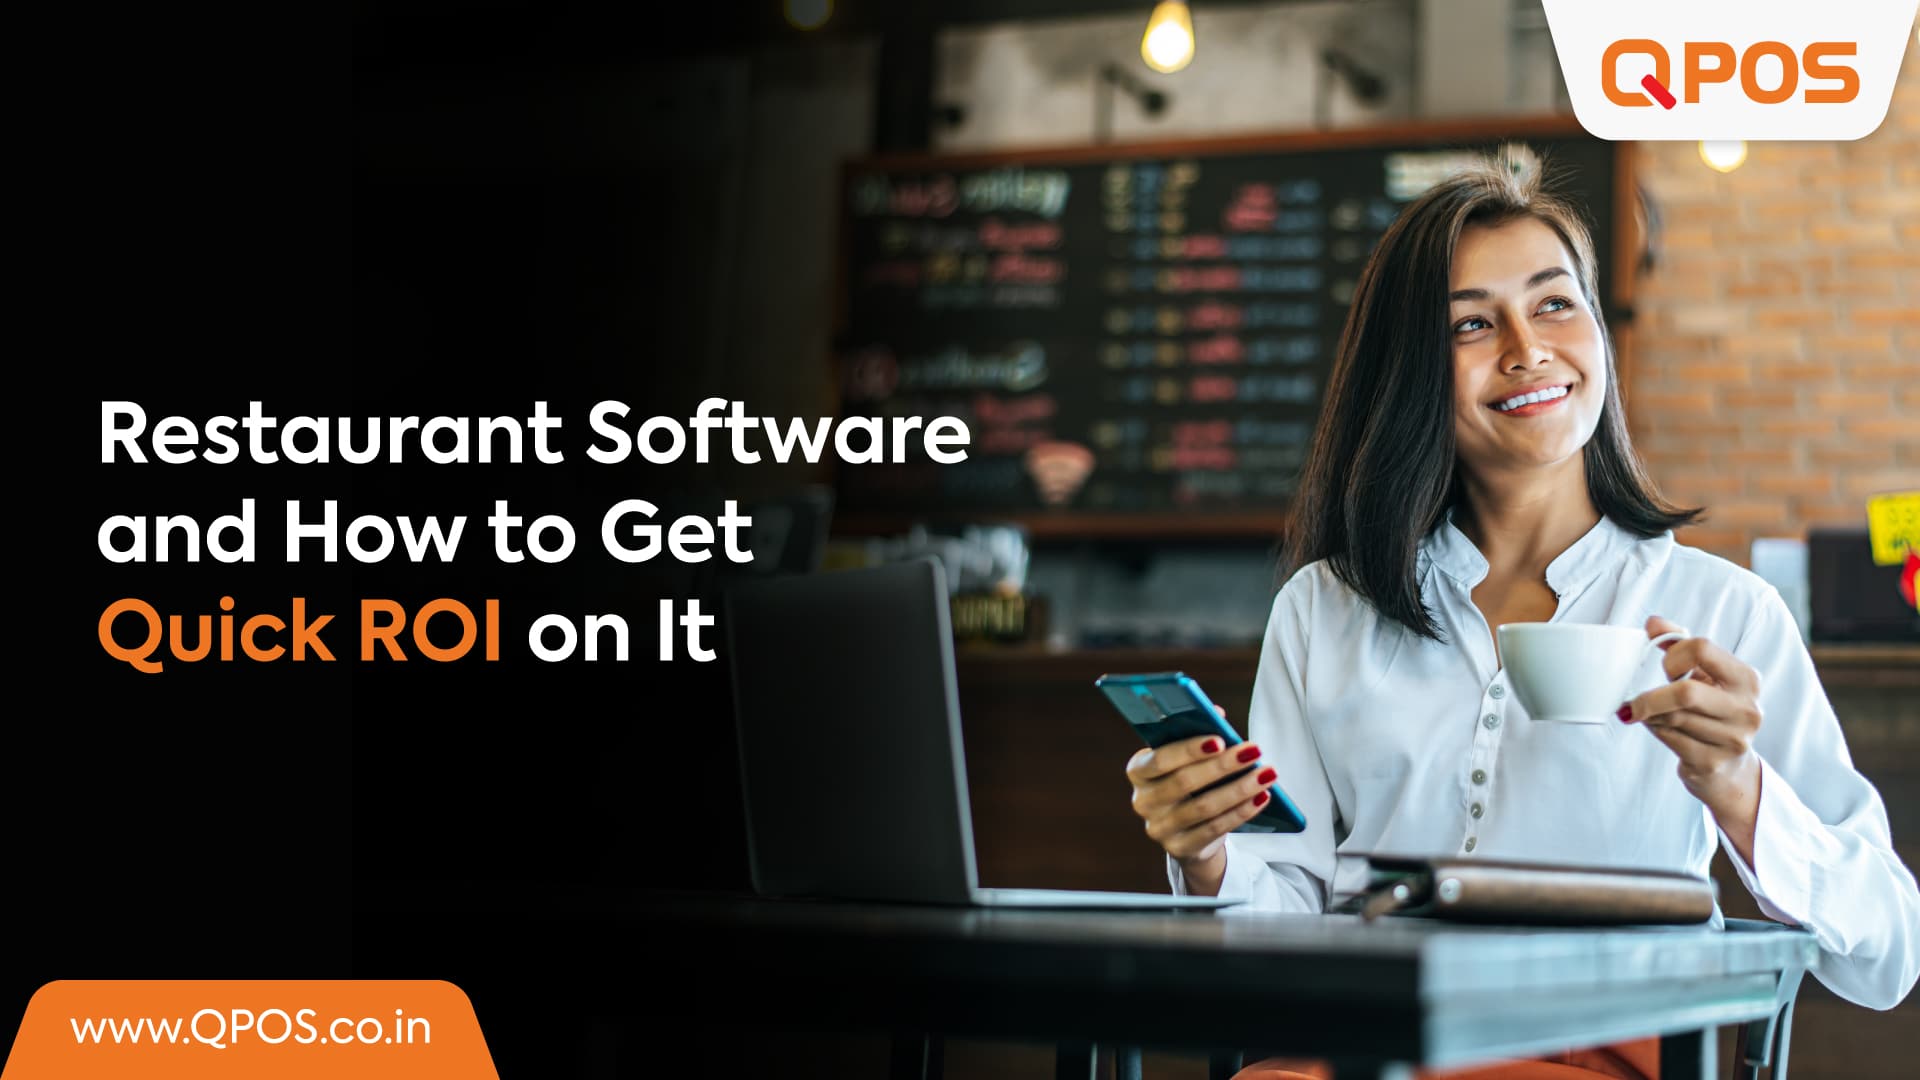 Restaurant Software and How to Get Quick ROI on It